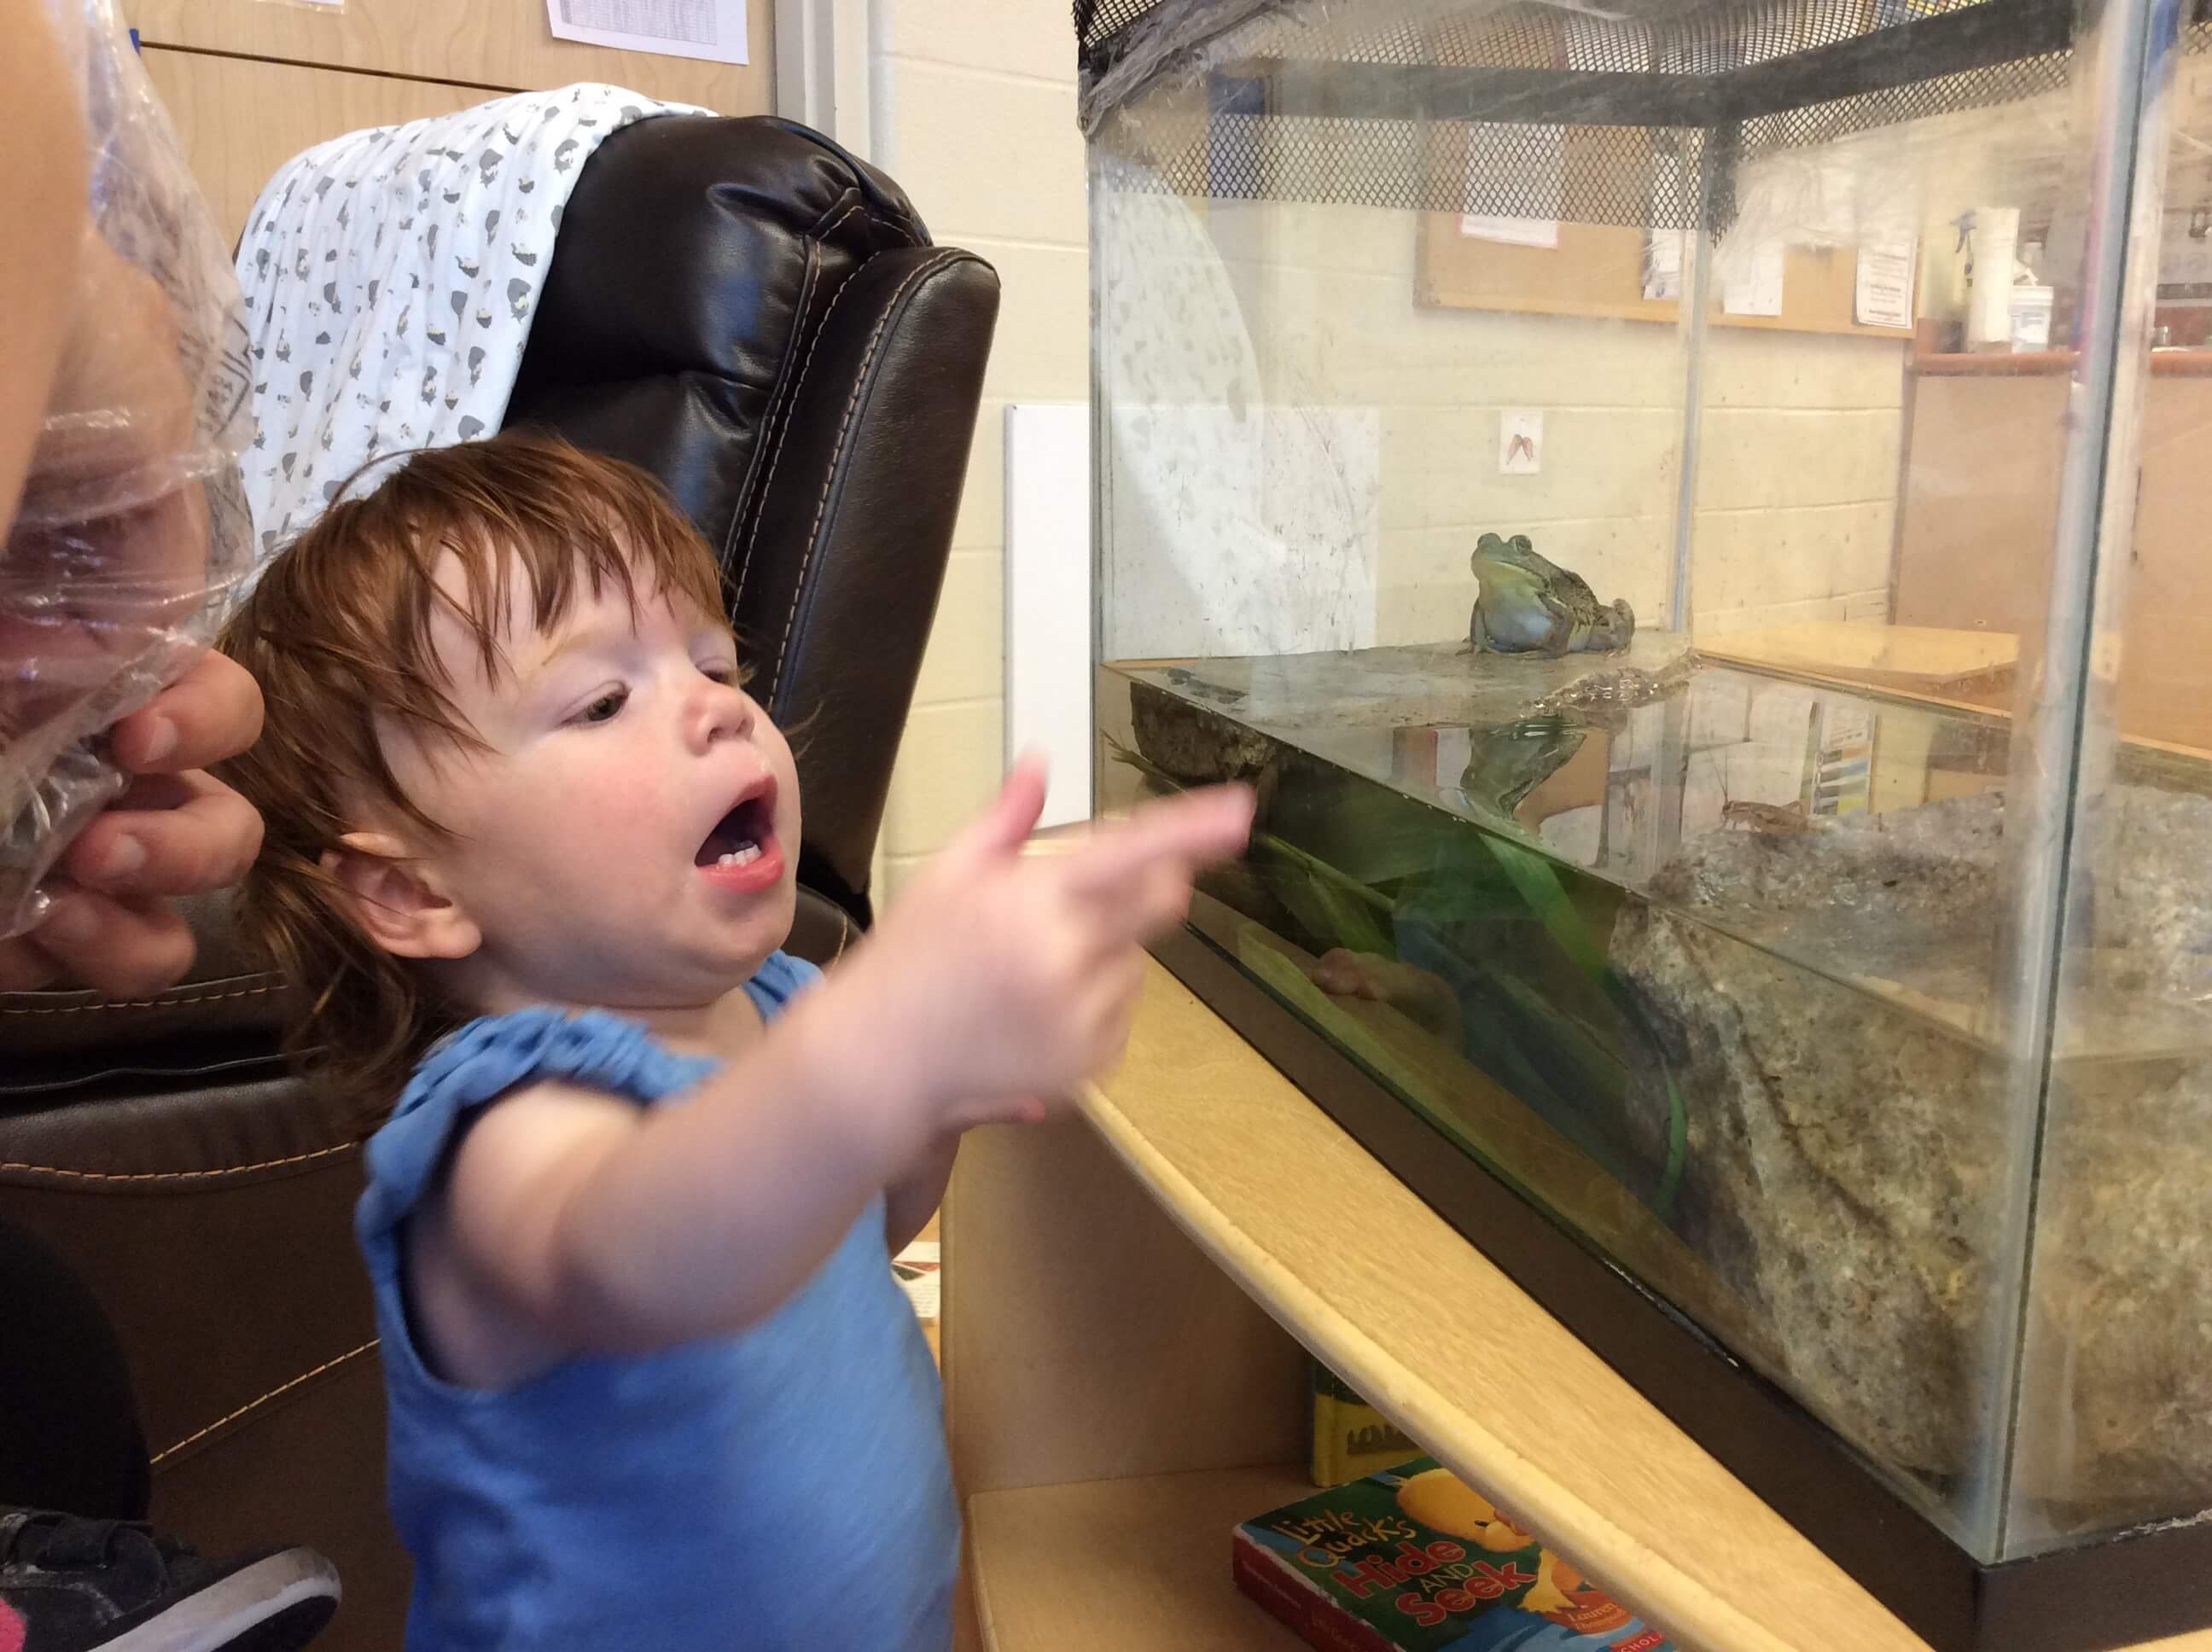 infant looking at a frog in a tank